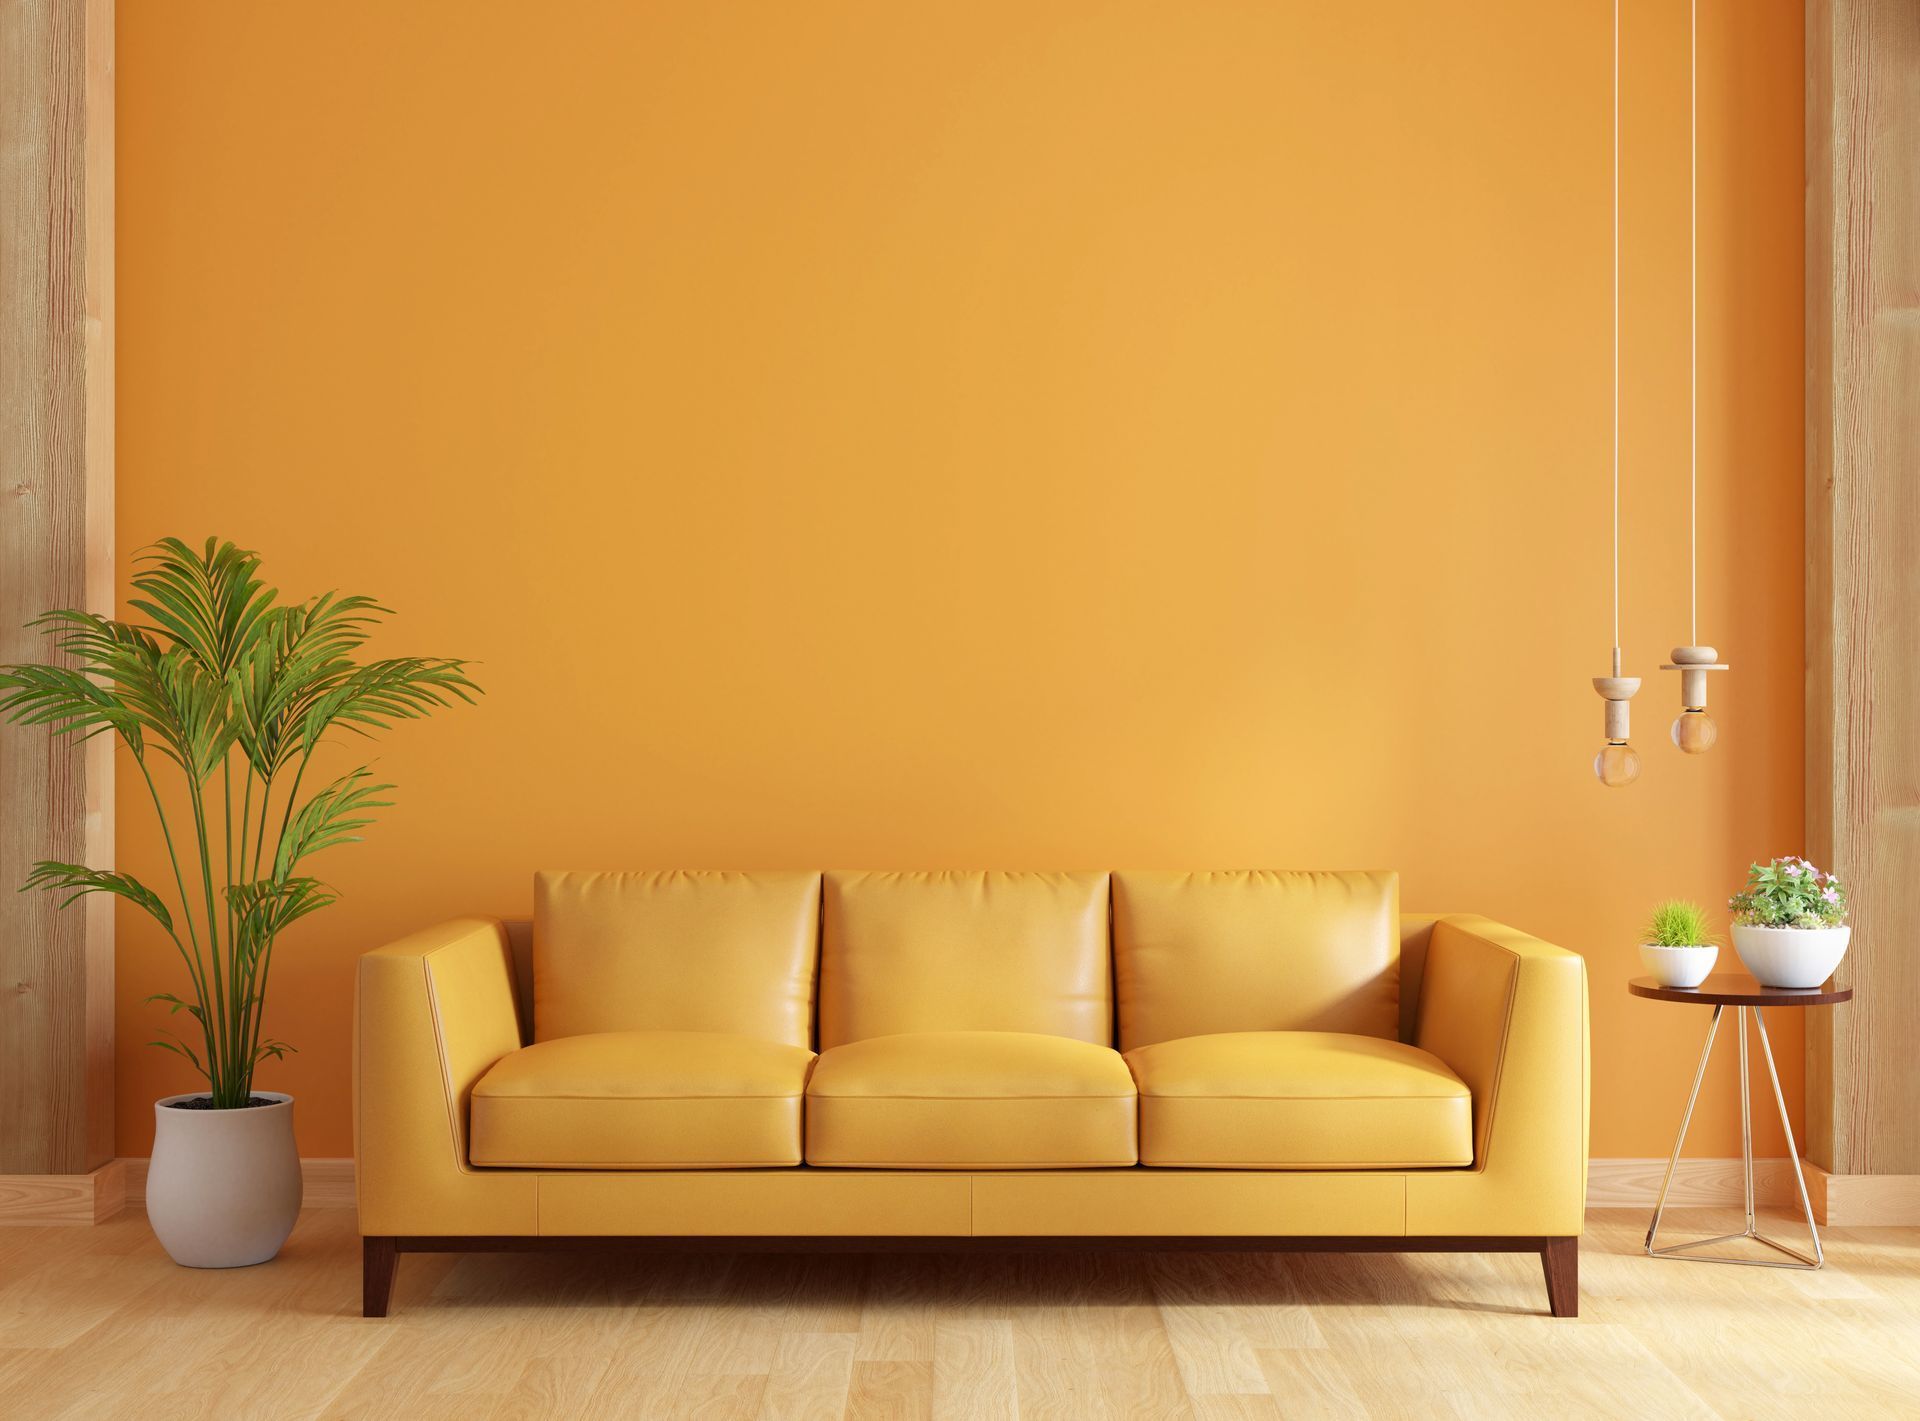 there is a yellow couch in the living room with orange walls .